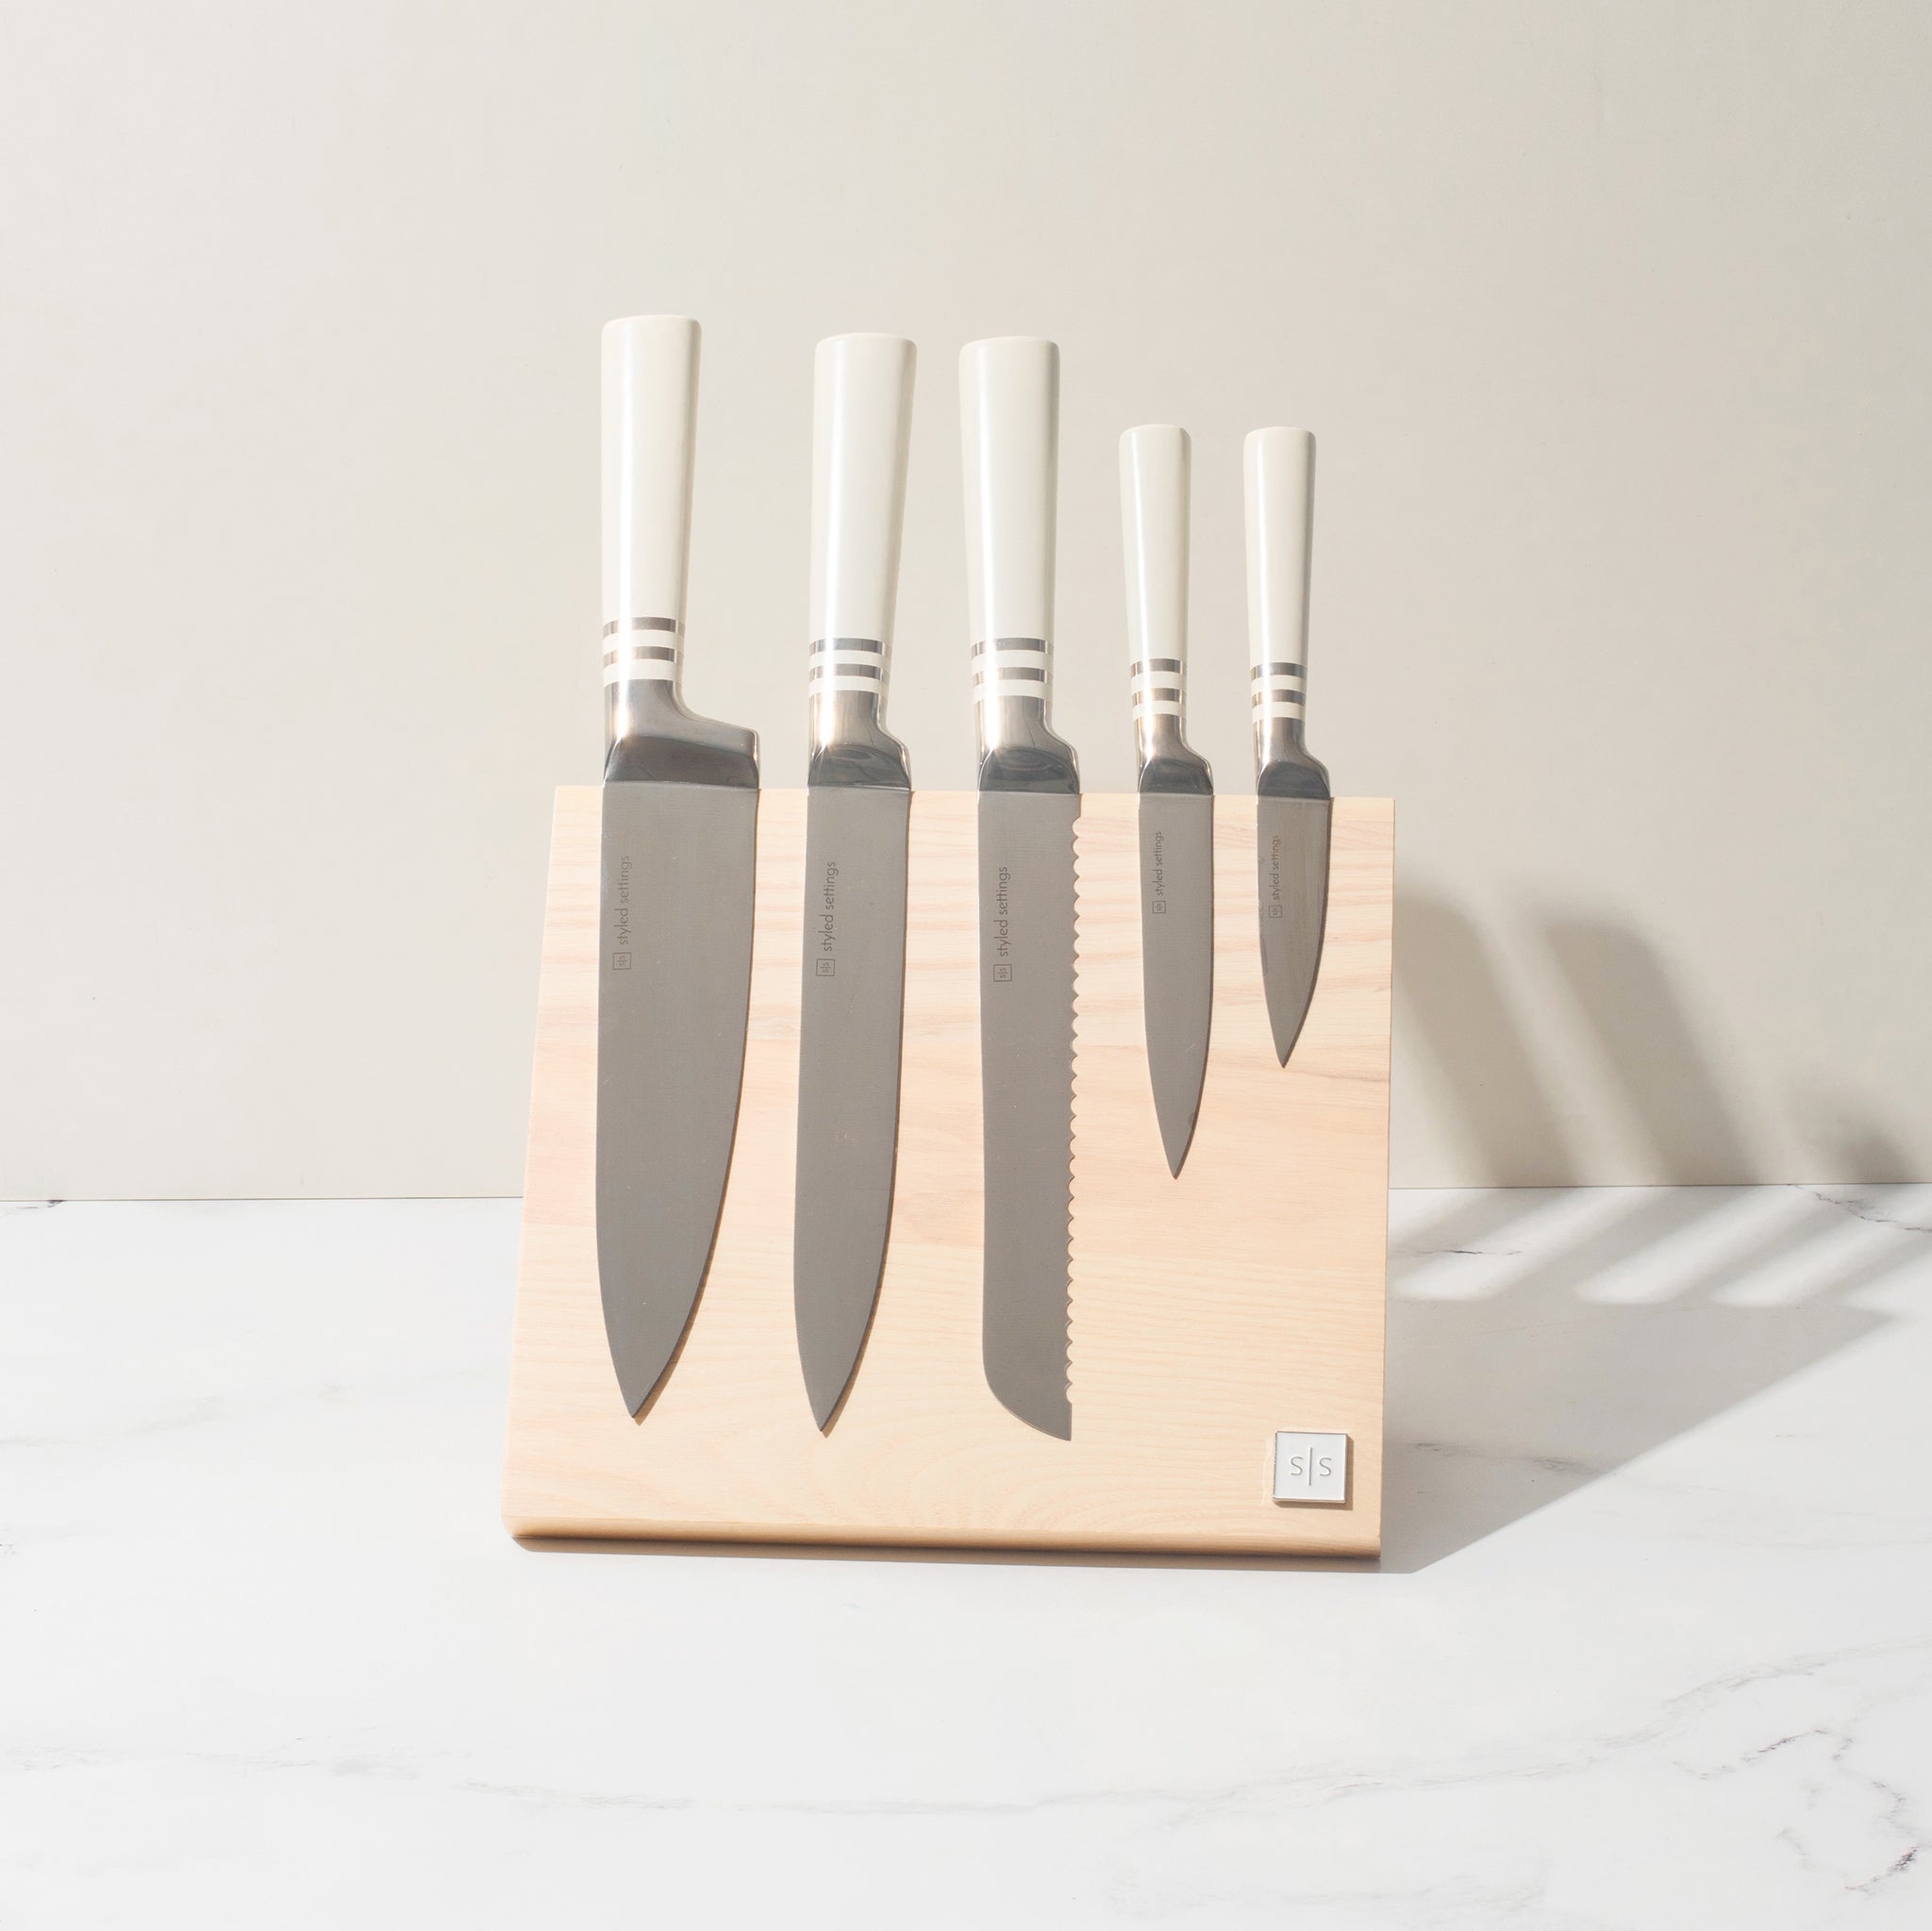  Magnetic Knife Block Without Knives - Magnetic Knife